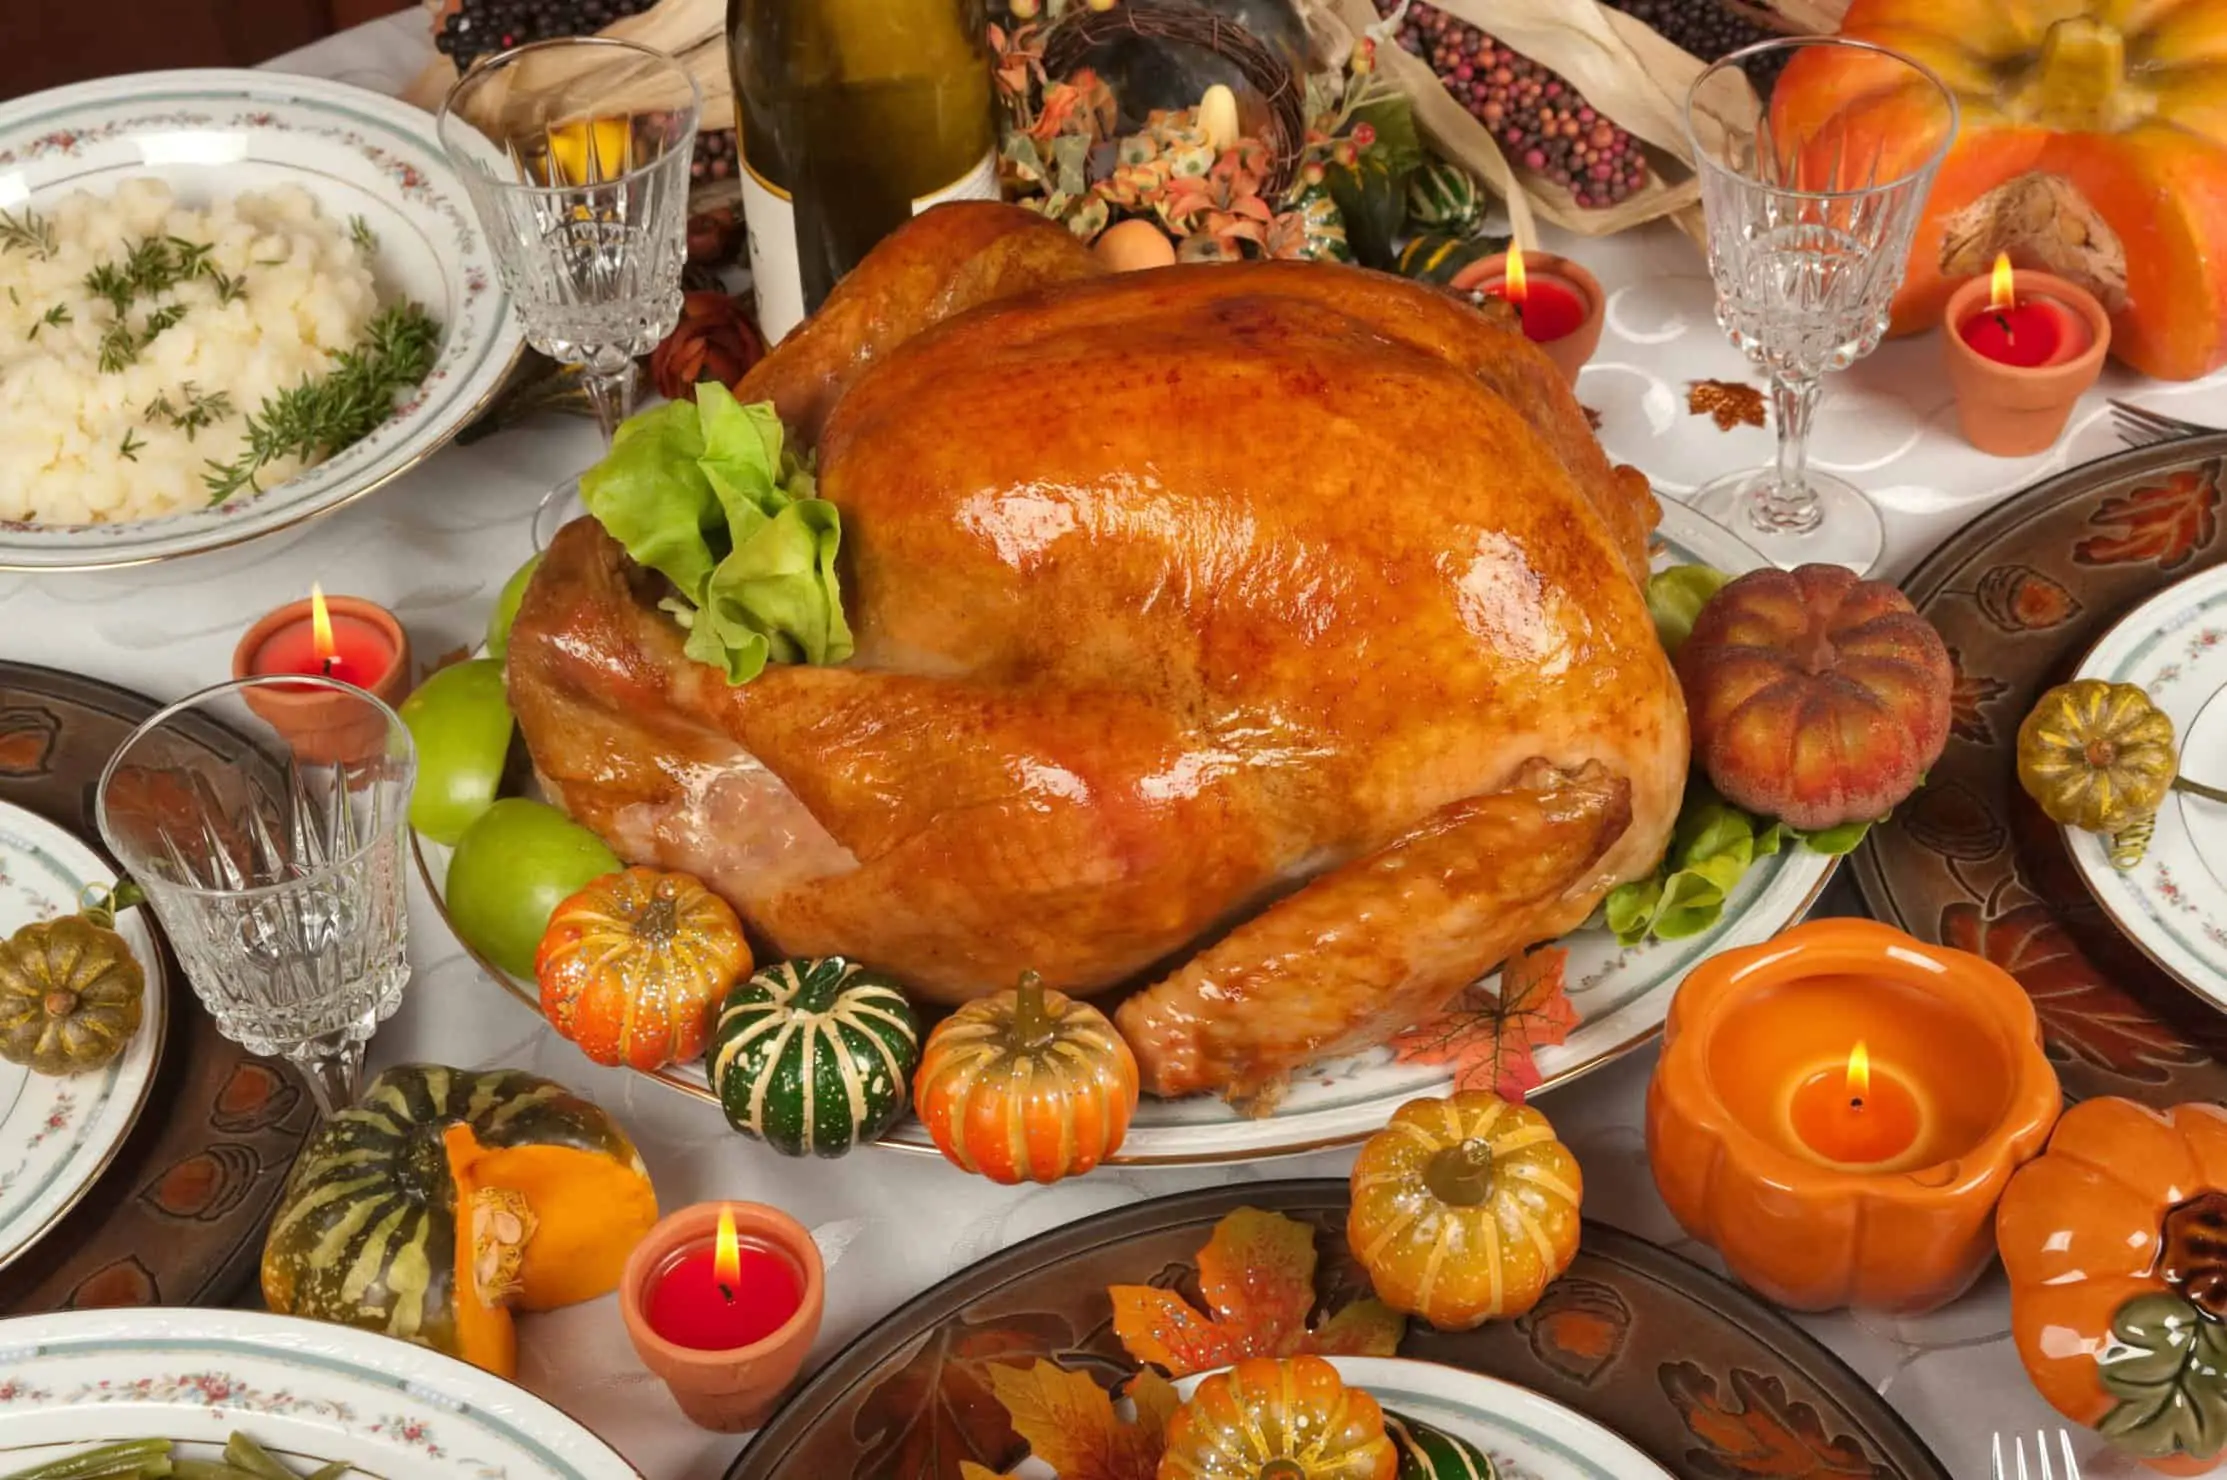 Give Thanks: Tips for a Cannabis-Themed Thanksgiving